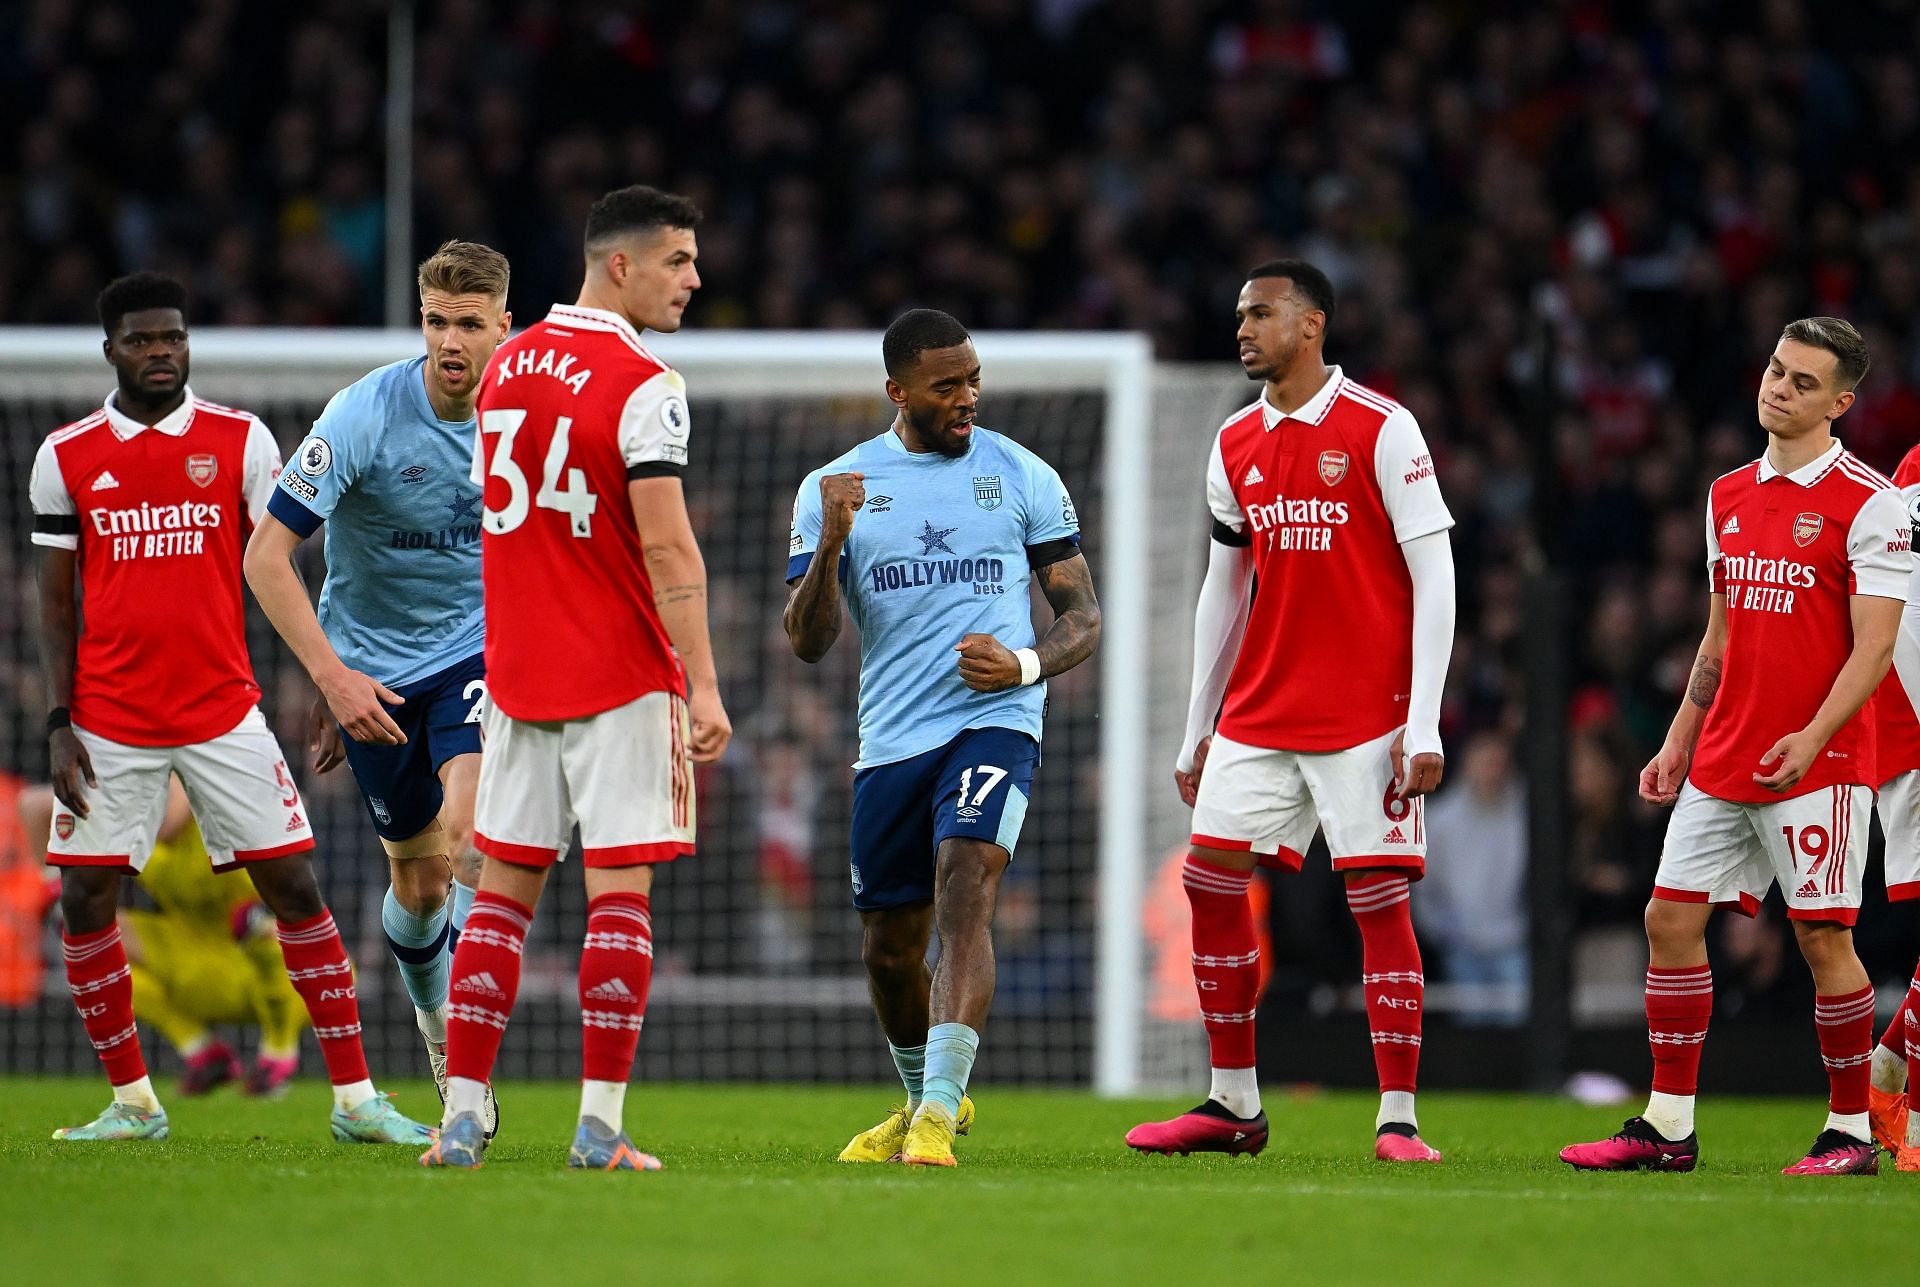 The Gunners have failed to win each of their last three matches